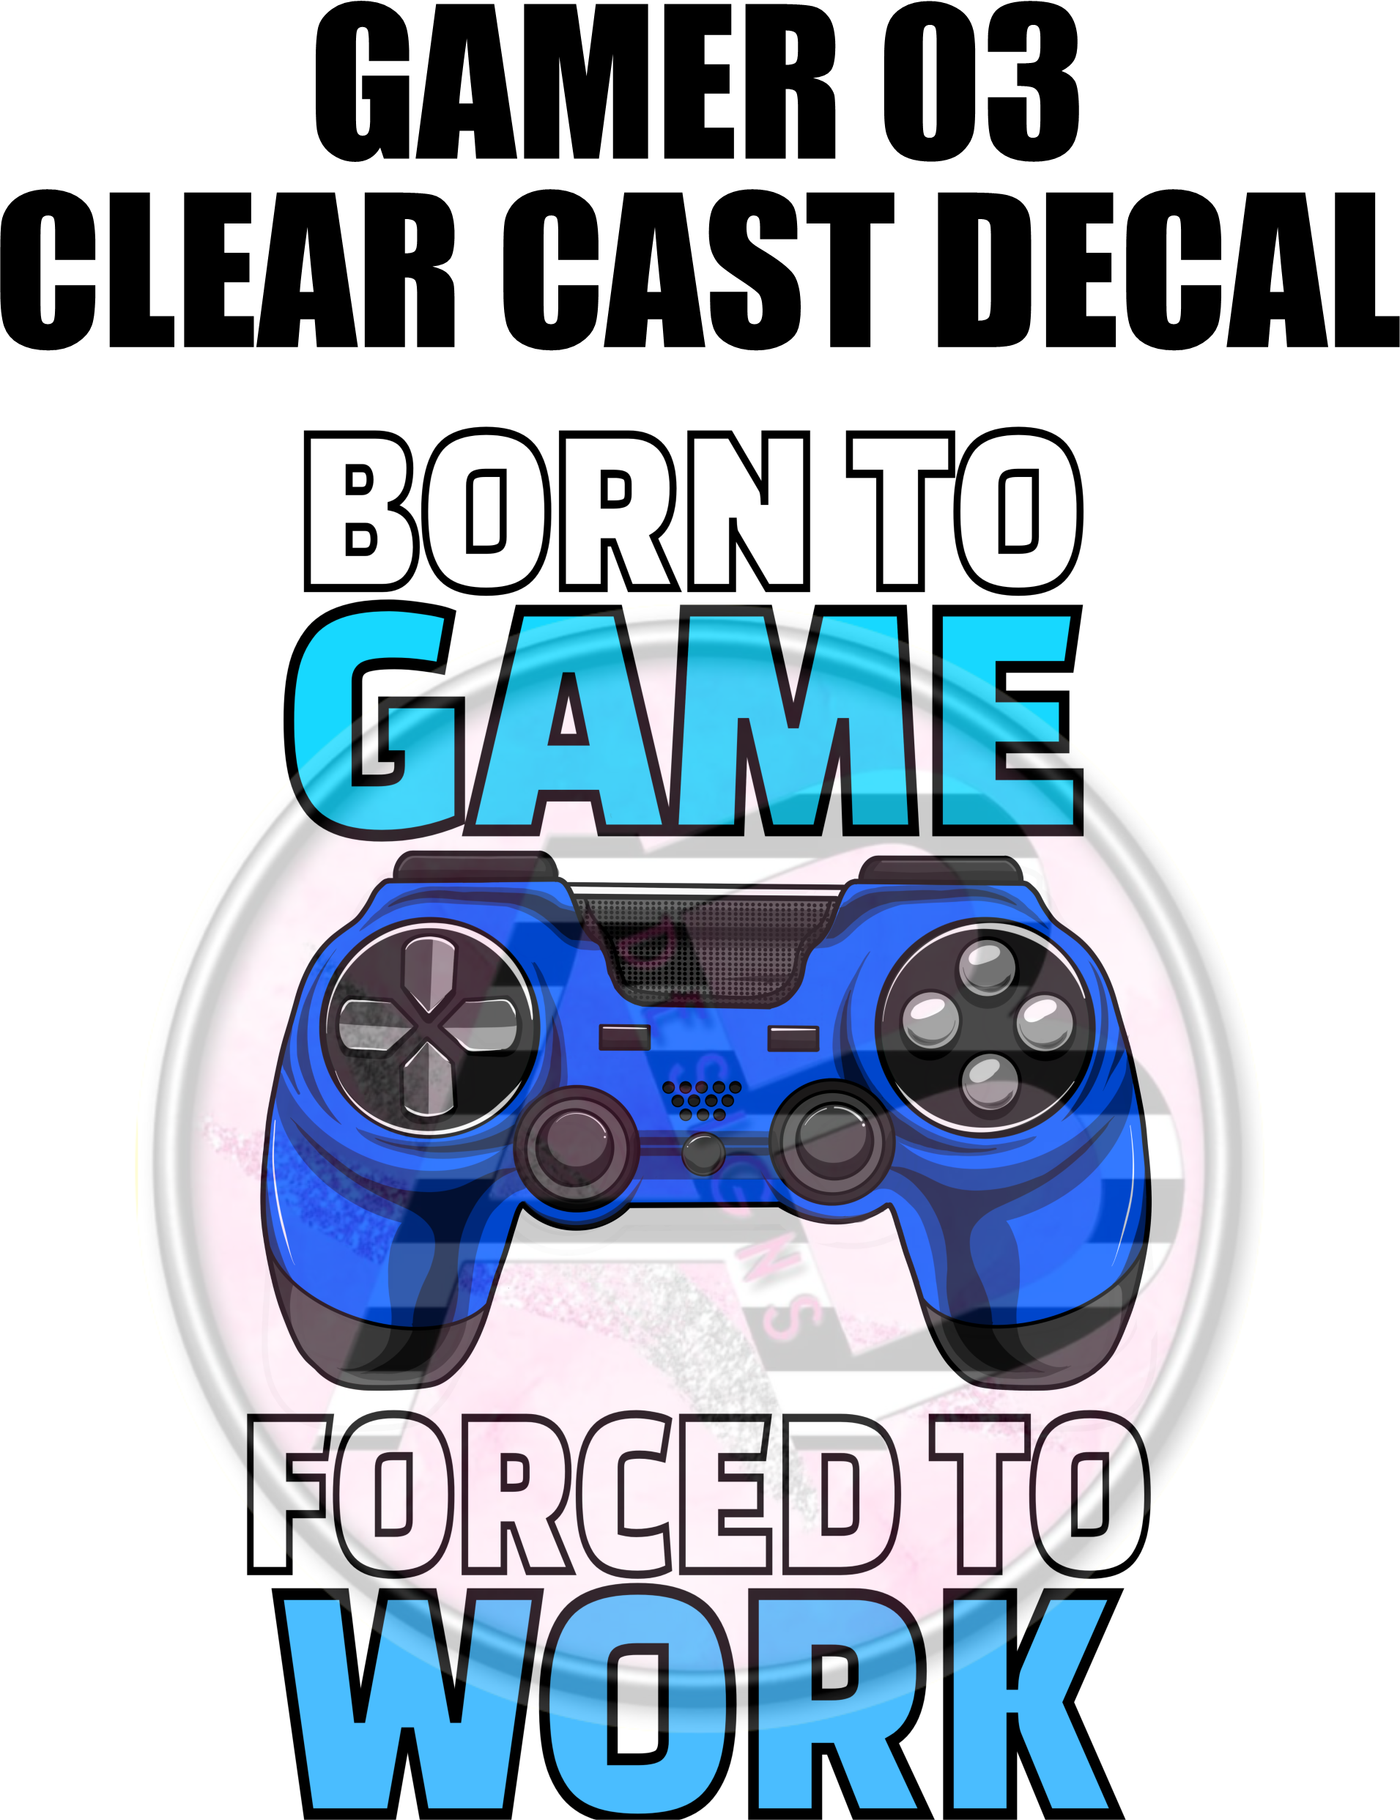 Gamer 03 - Clear Cast Decal